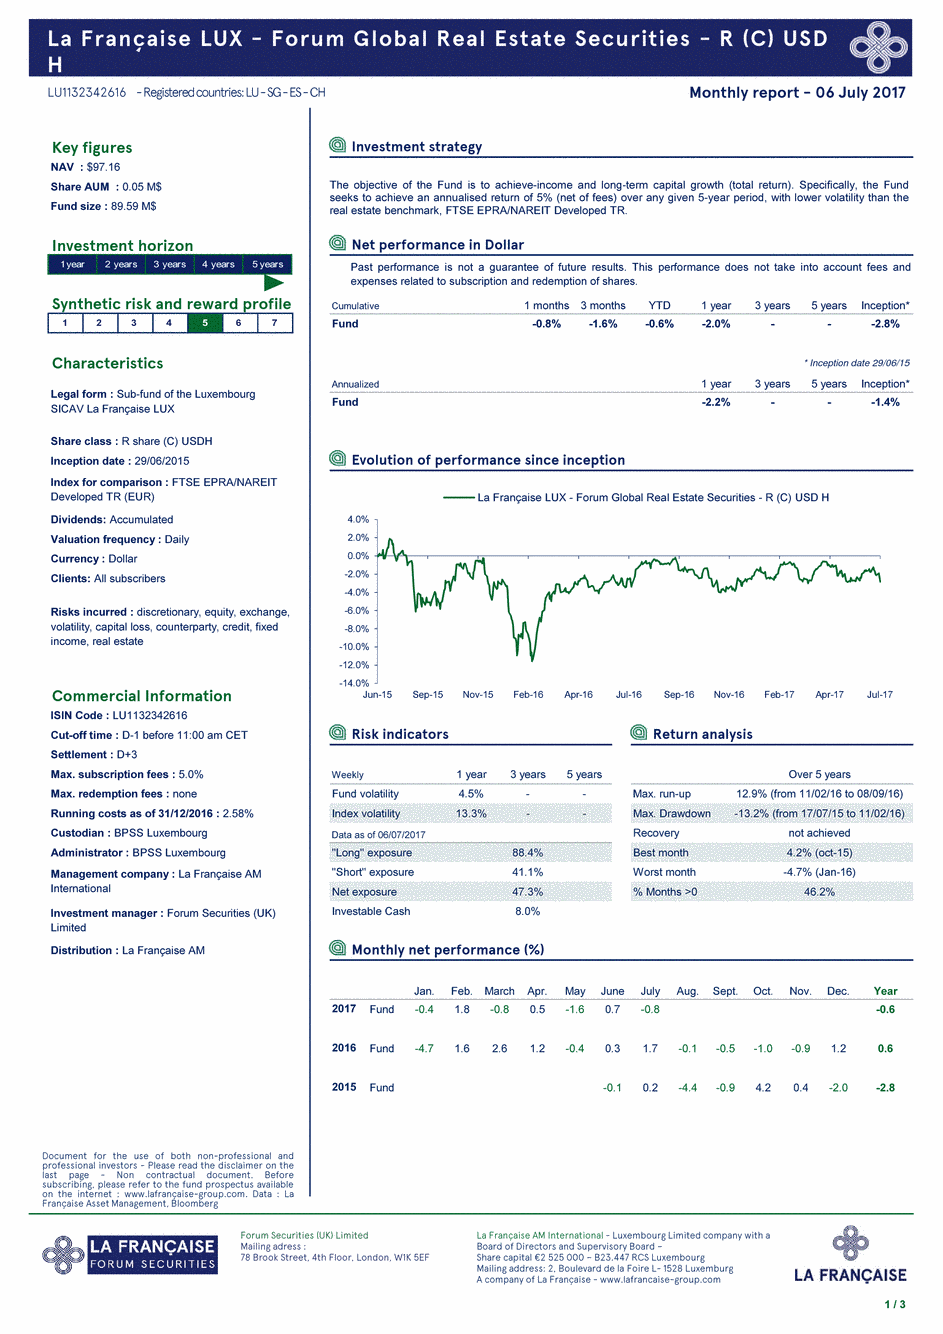 Reporting La Française LUX - Forum Global Real Estate Securities - R (C) USD H - 31/07/2017 - Anglais